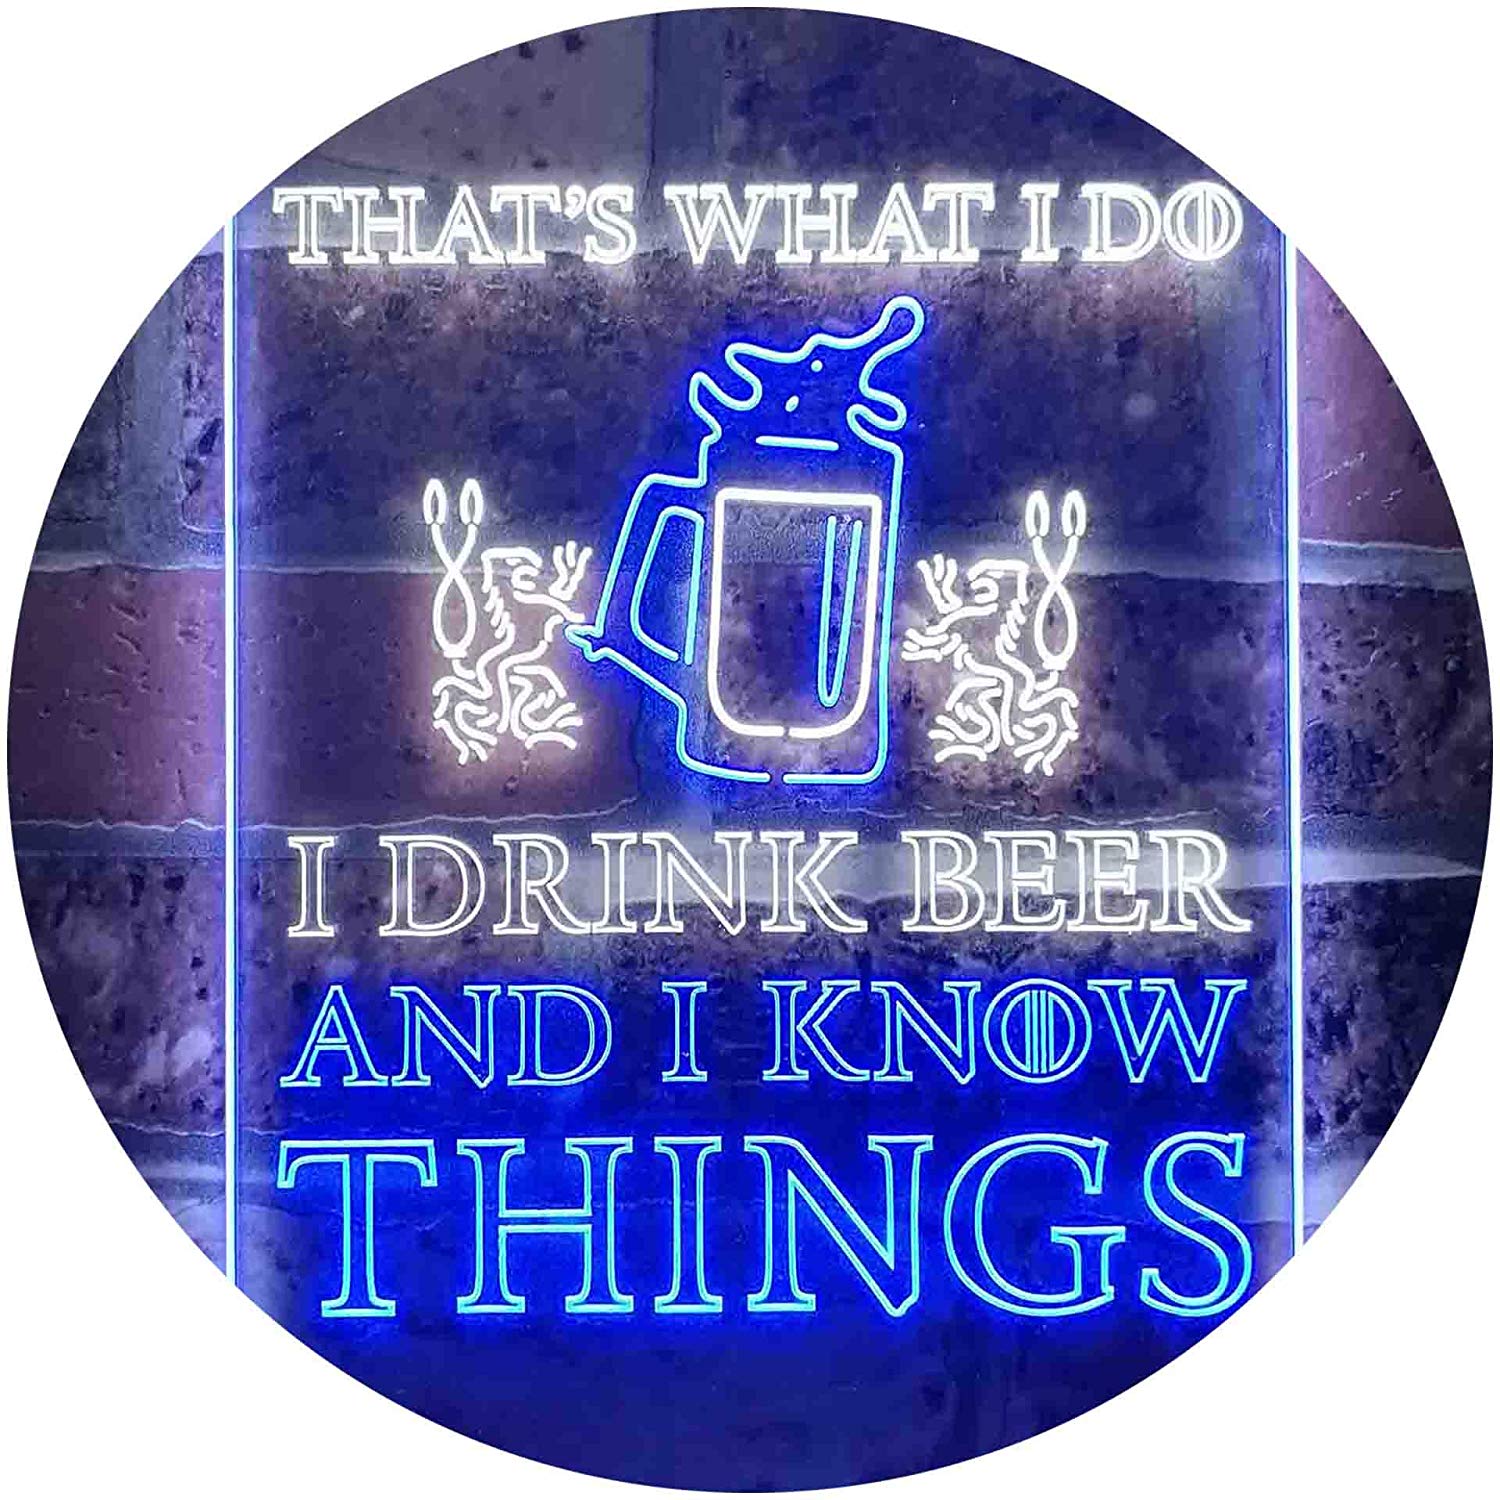 I Drink Beer and I Know Things LED Neon Light Sign - Way Up Gifts